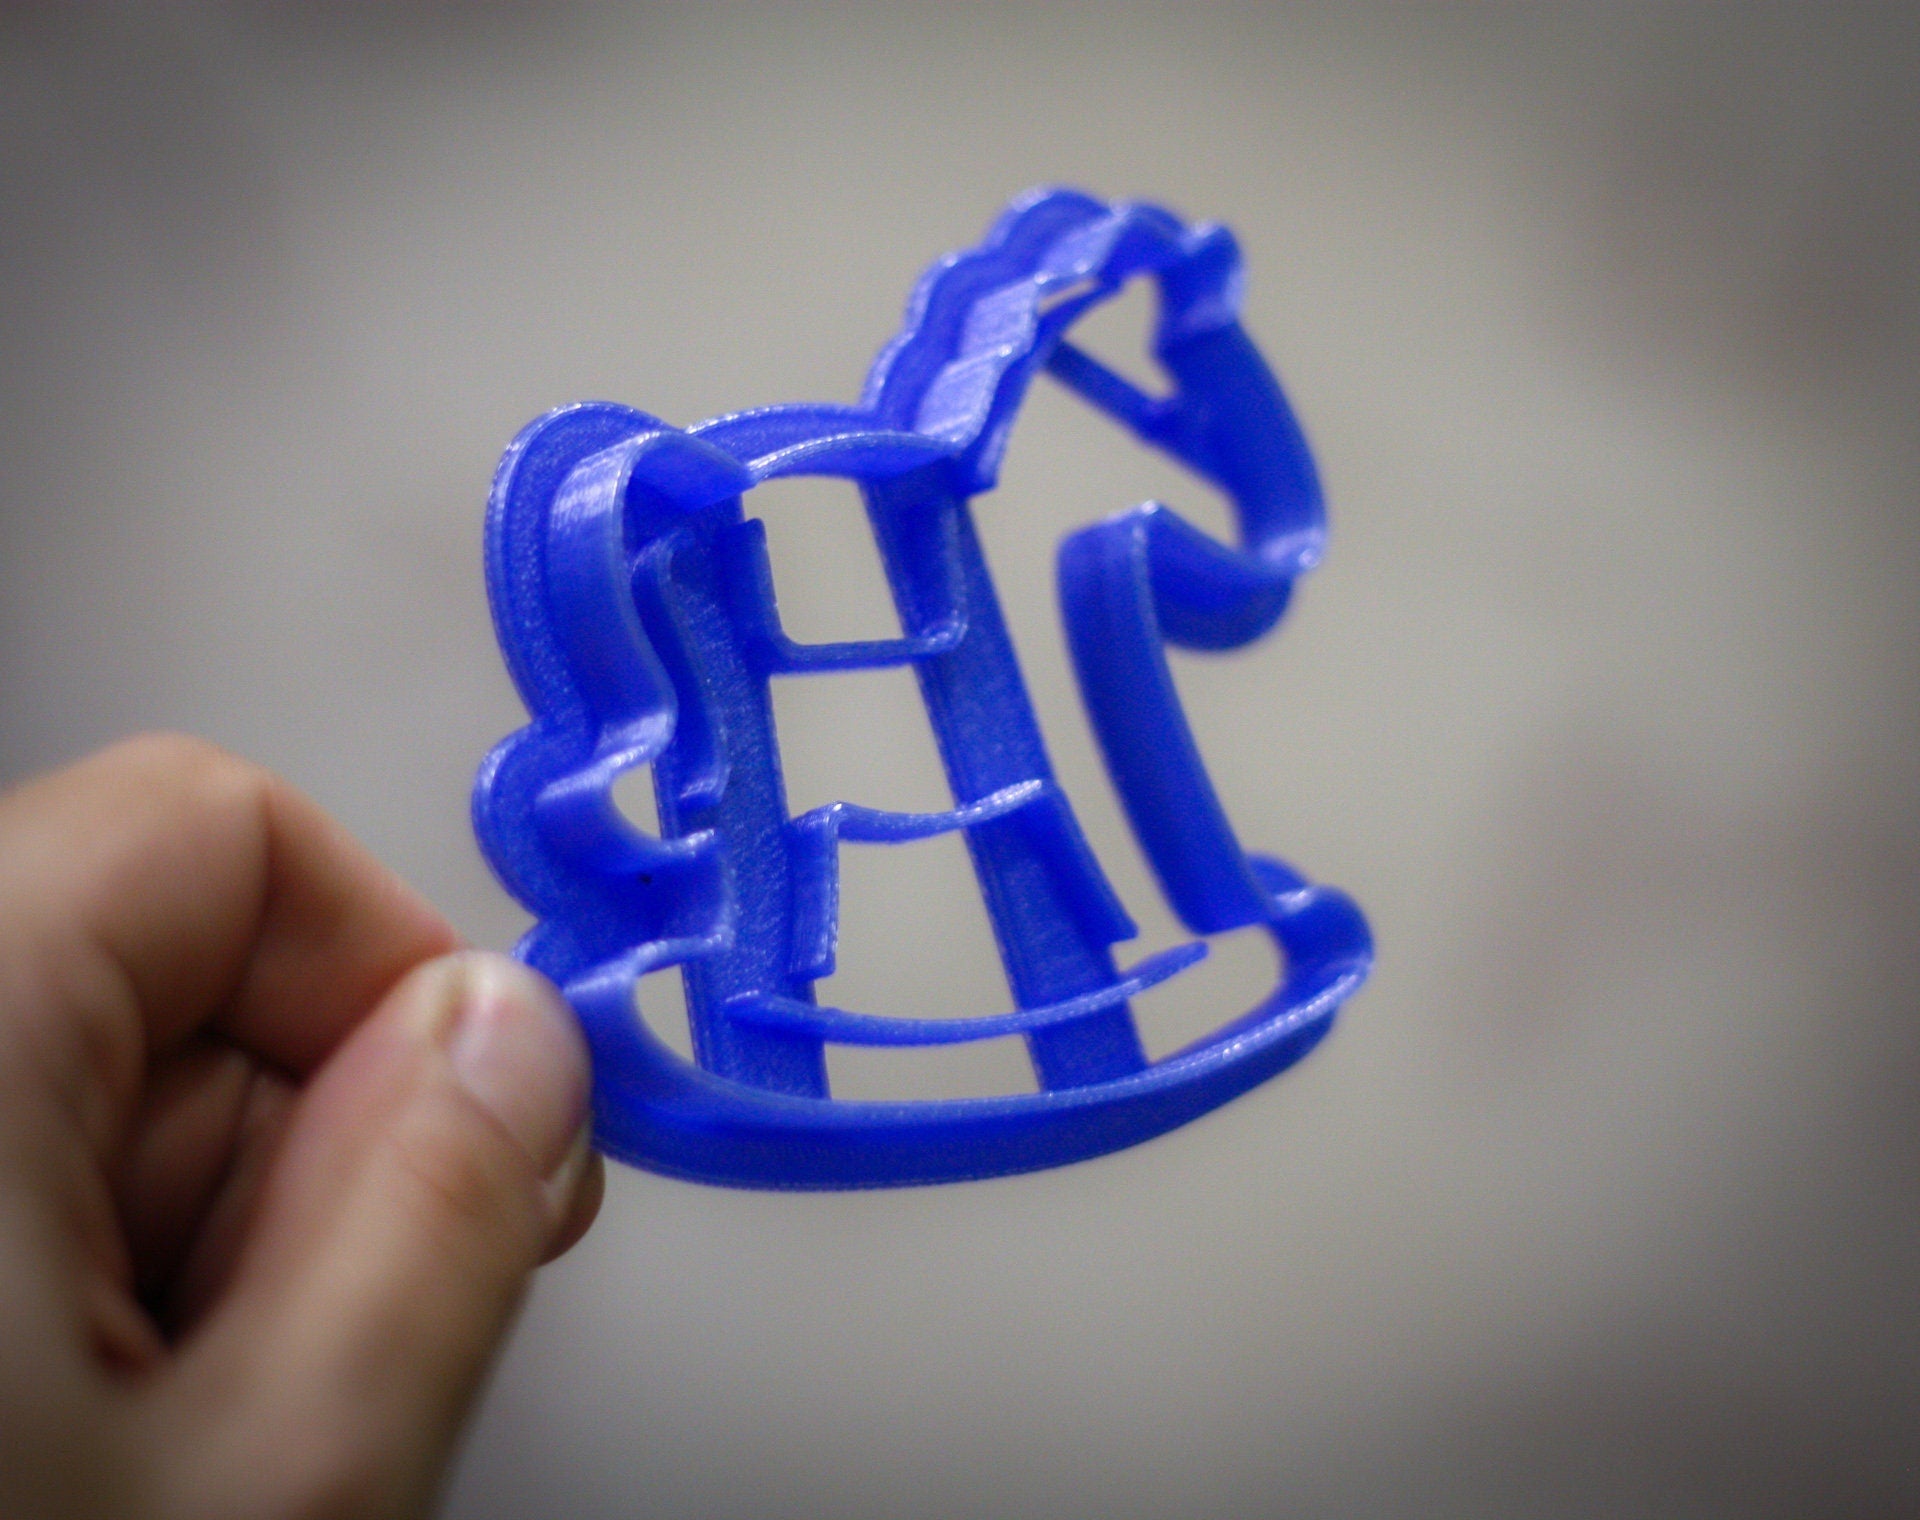 Baby Carriage, Baby Onesie, Baby Bottle, Rocking Horse Cookie Cutter | Baby Shower Guest Gifts | fondant cutter - 3DPrintProps